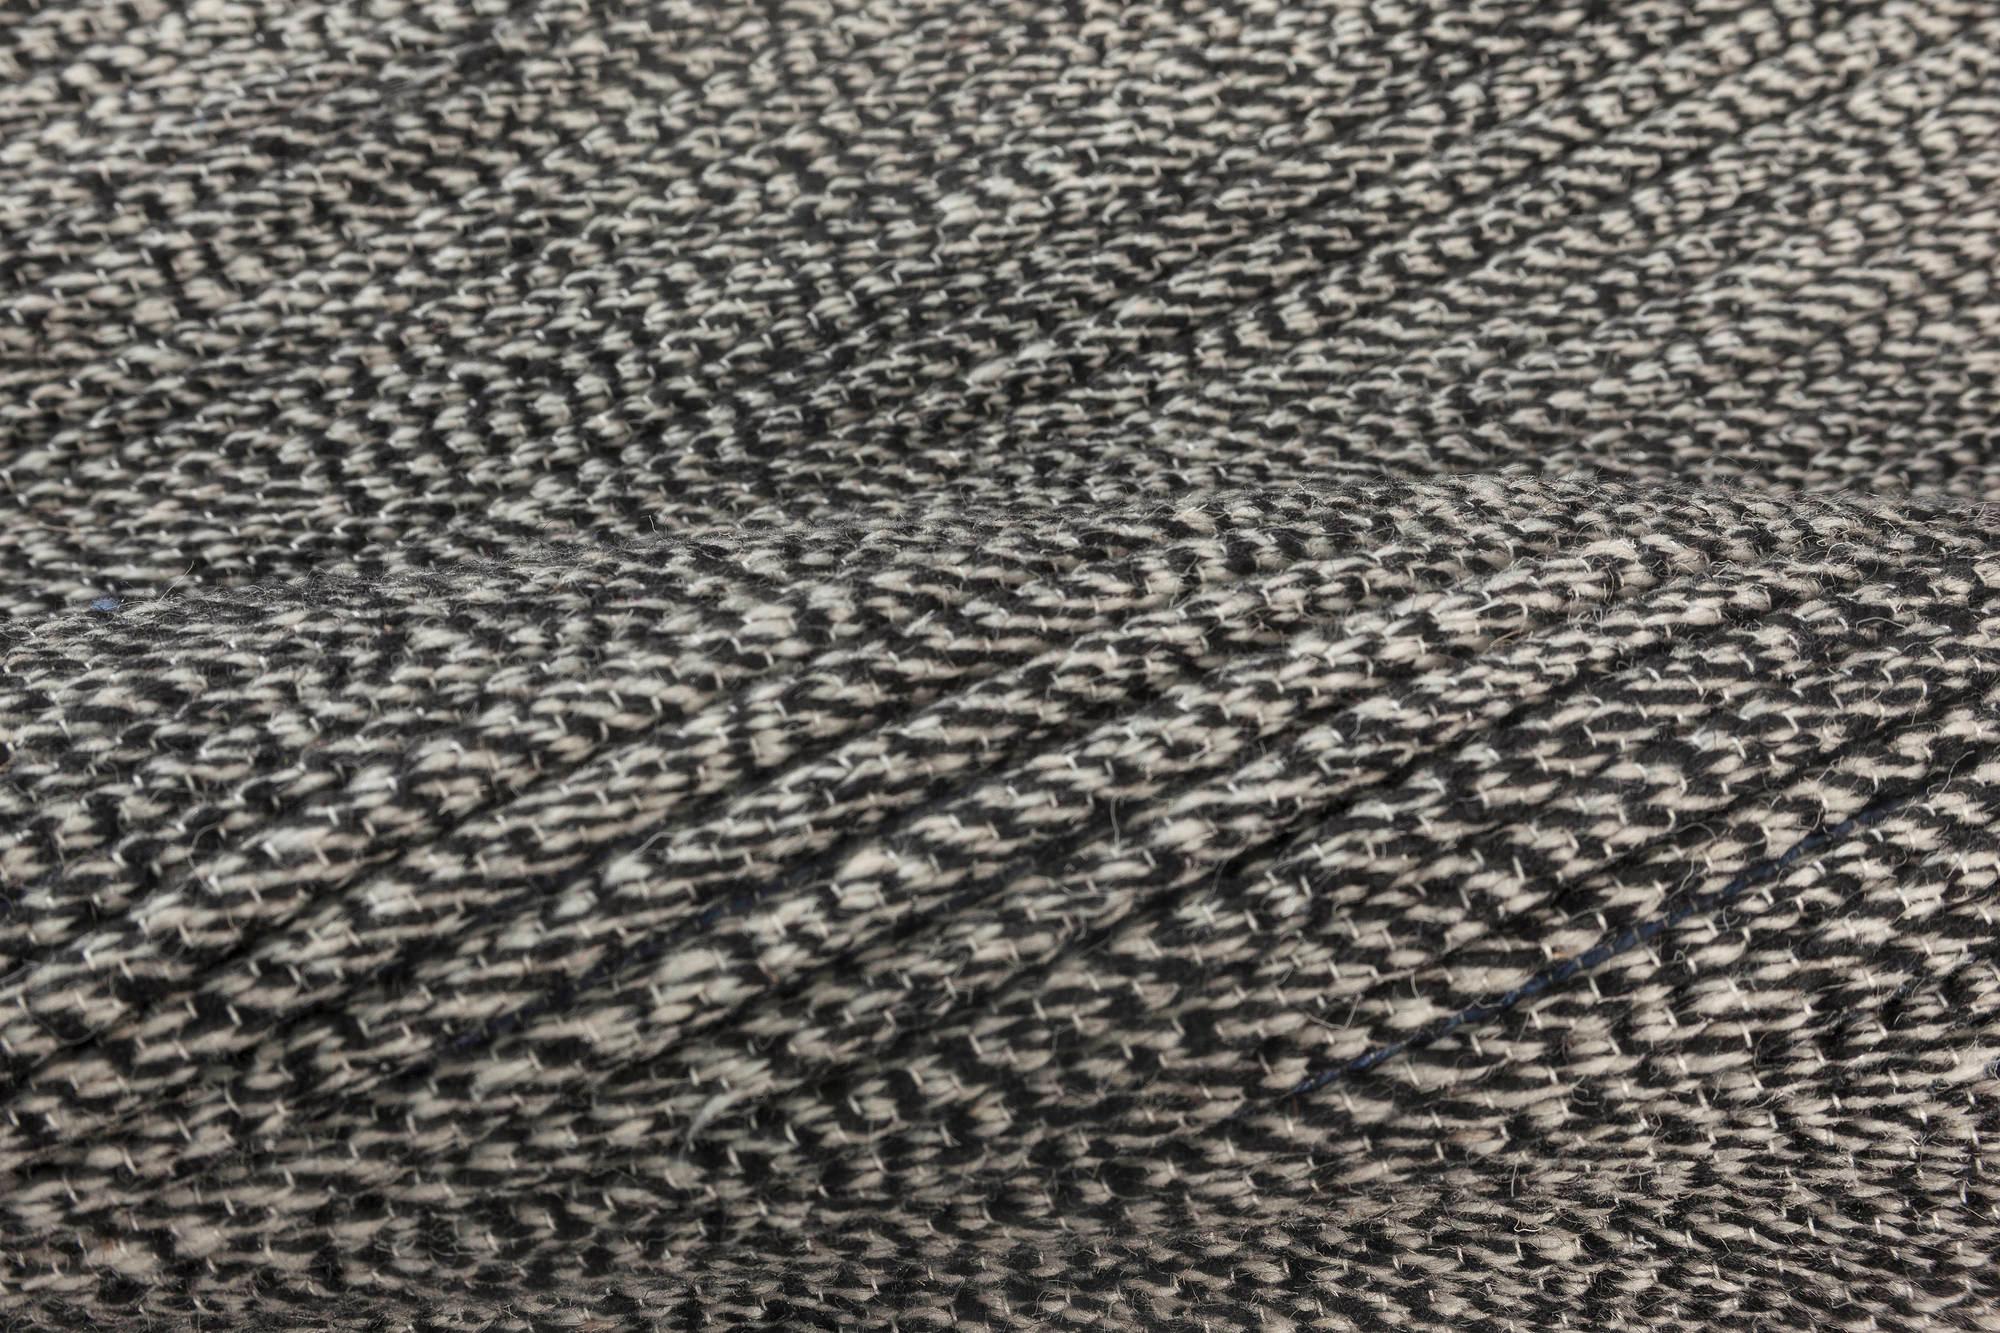 Bauer Collection gray handmade wool rug by Doris Leslie Blau.
Size: 6'7